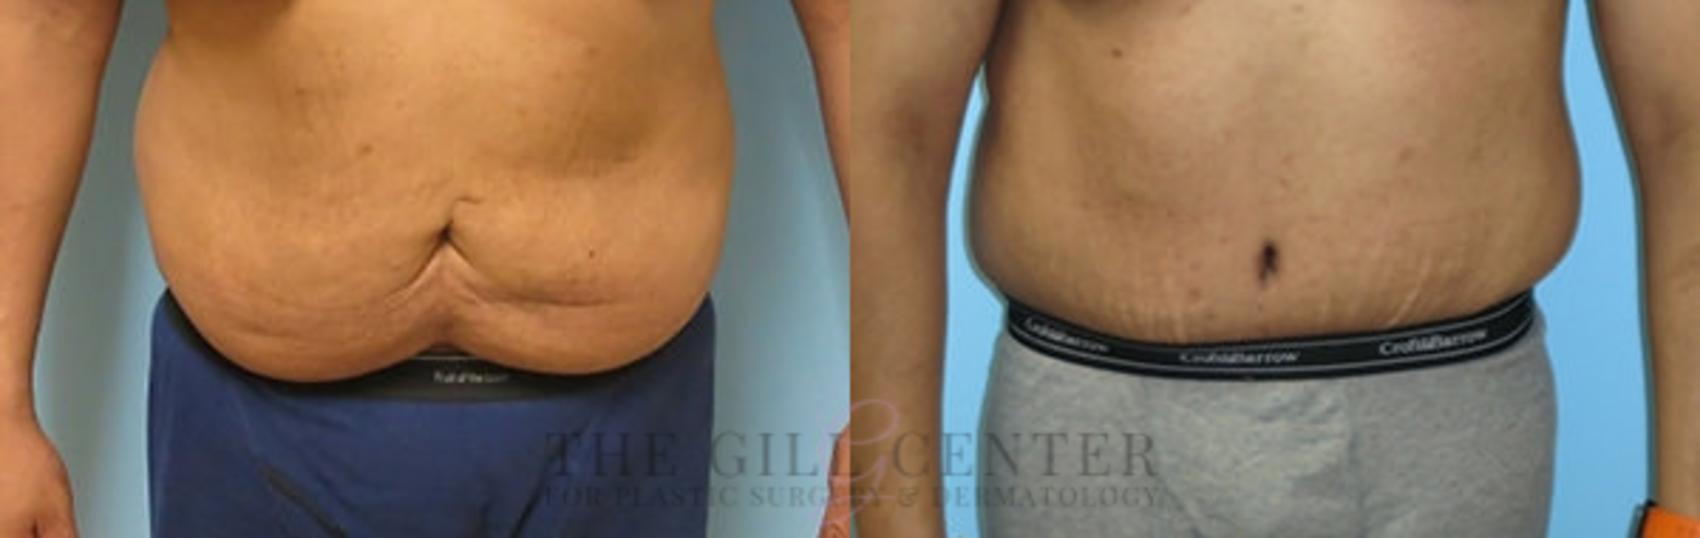 Tummy Tuck Case 216 Before & After Front | The Woodlands, TX | The Gill Center for Plastic Surgery and Dermatology